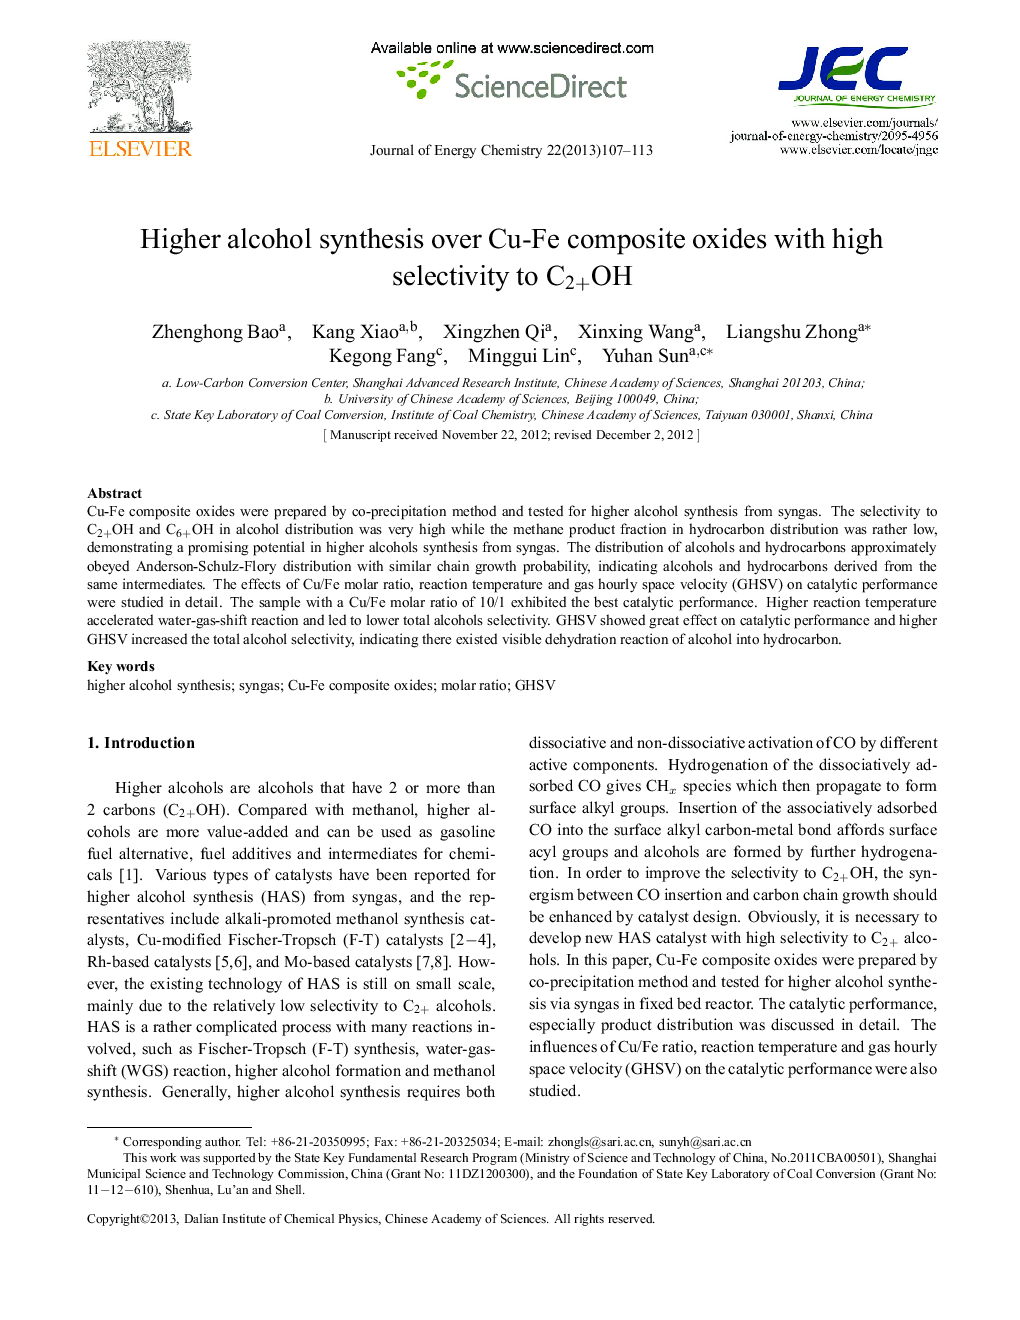 Higher alcohol synthesis over Cu-Fe composite oxides with high selectivity to C2+OH 